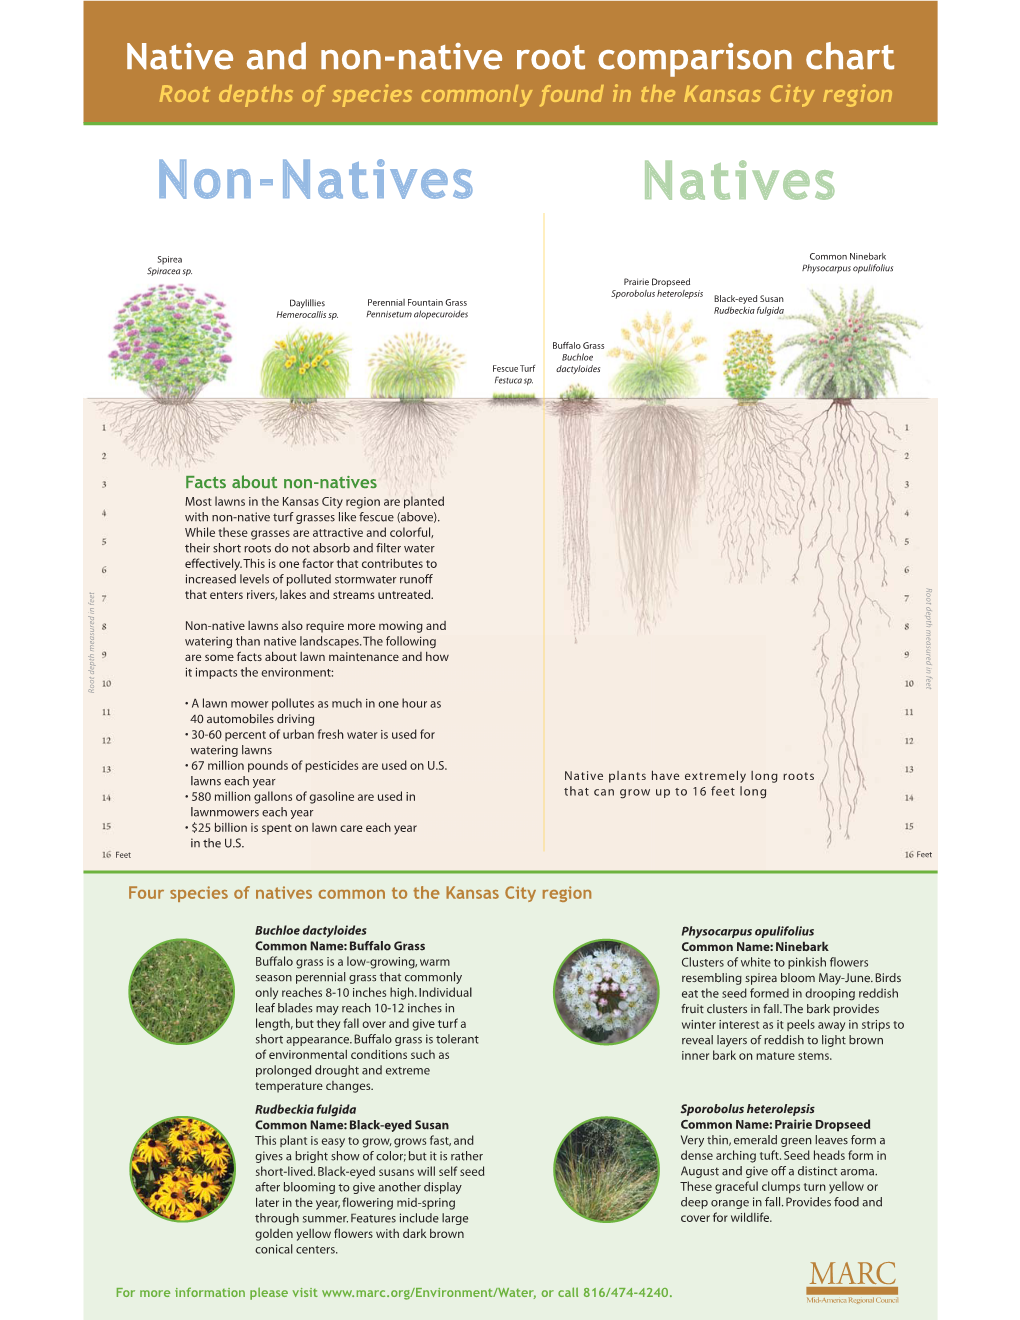 Know Your Roots Brochure